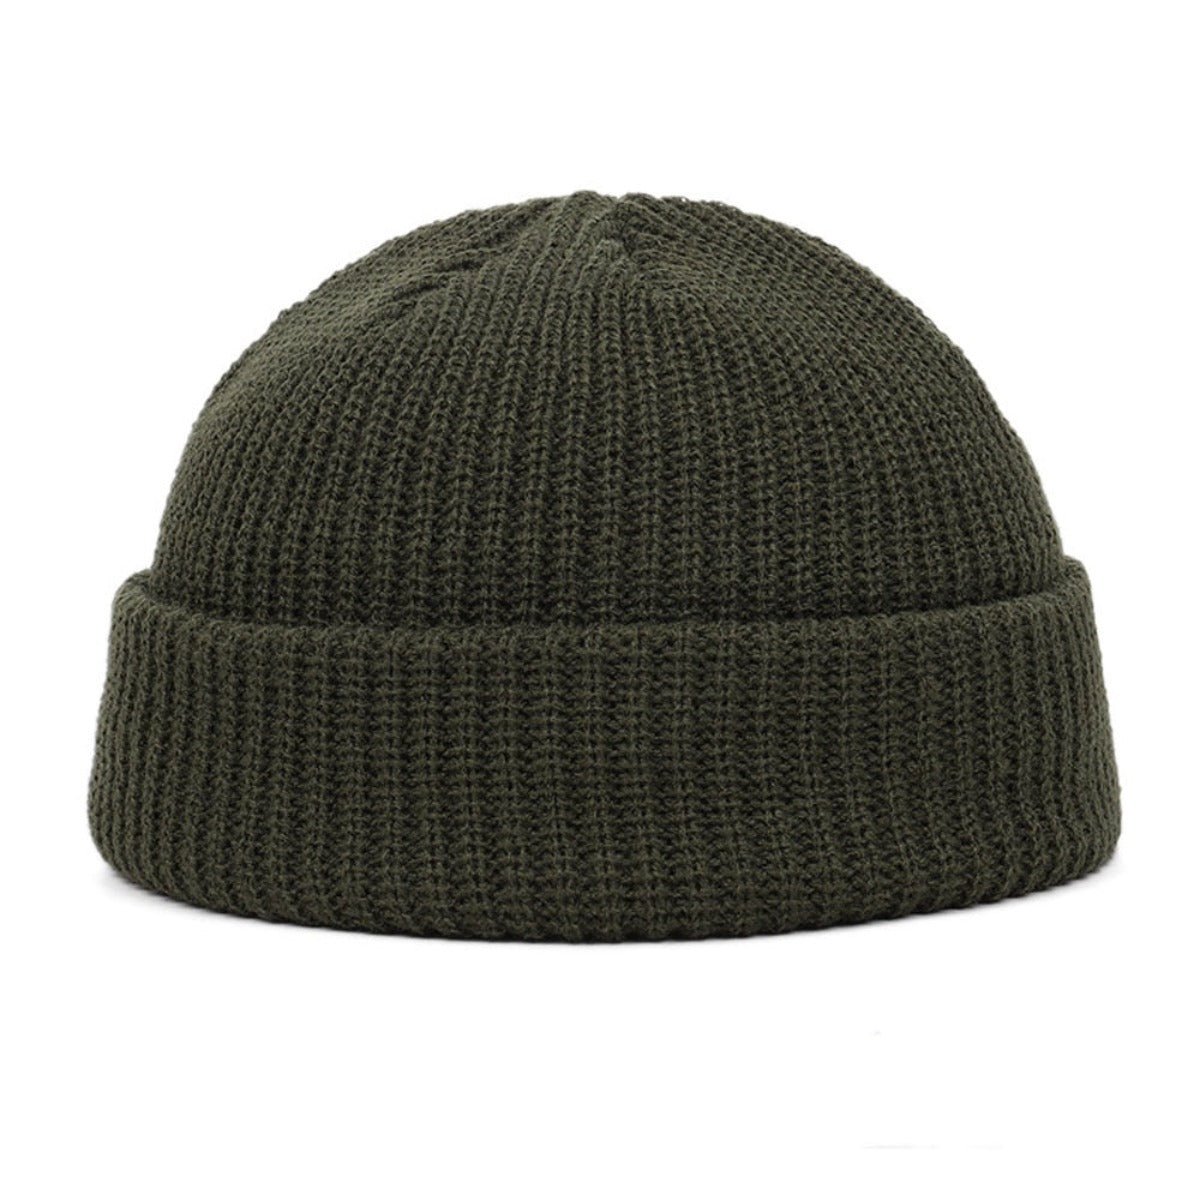 A green, Wool Knitted Skull Cap Beanie perfect for winter fashion.